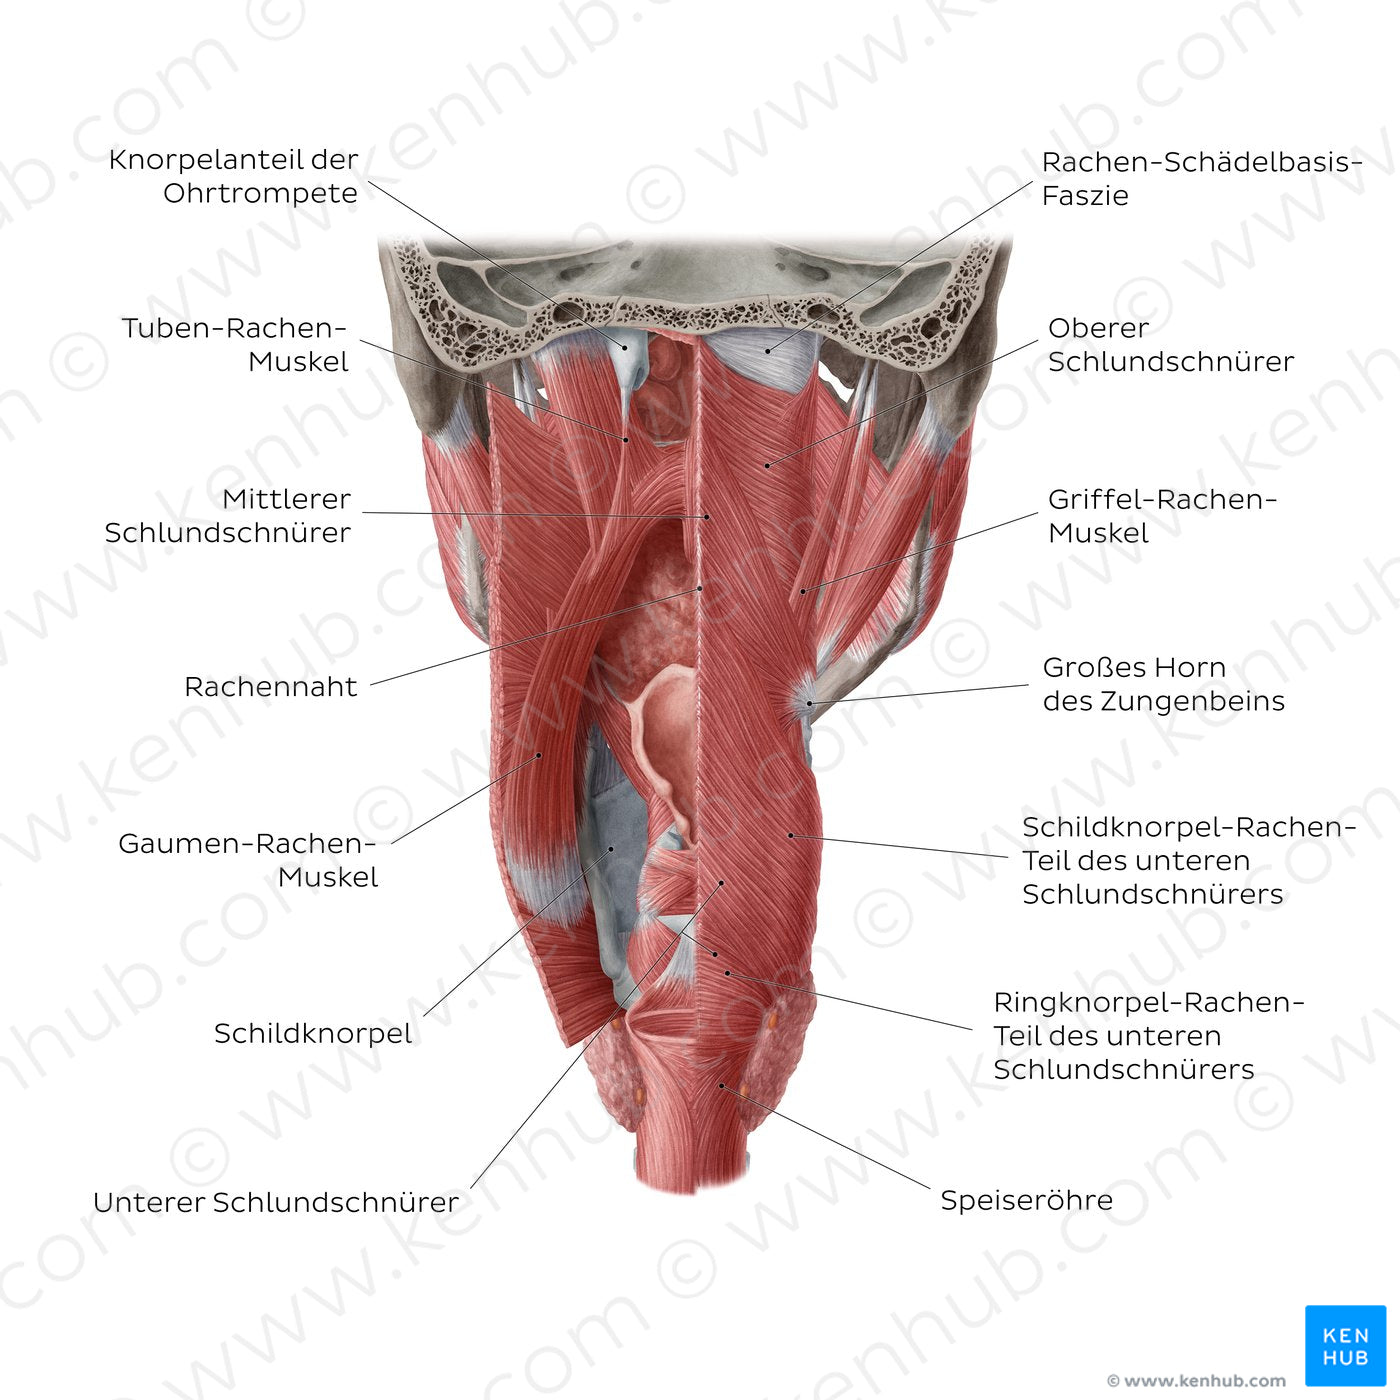 Muscles of the pharynx (German)